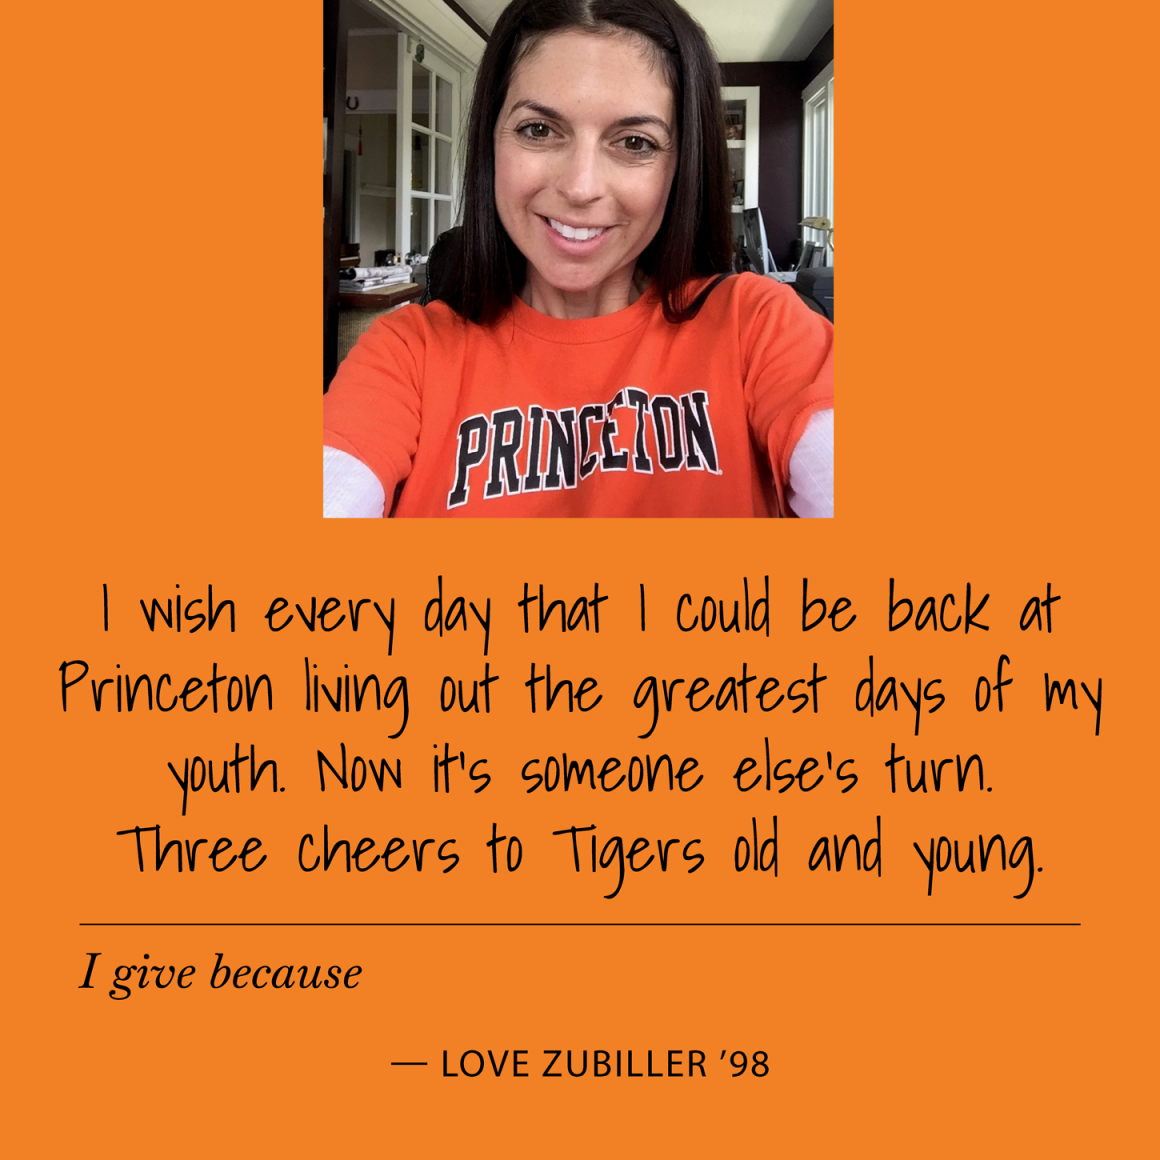 I give because I wish everyday I could be back at Princeton living out the greatest days of my youth. Now it's someone else's turn. Three cheers to Tigers old and young. Love Zubiller '98